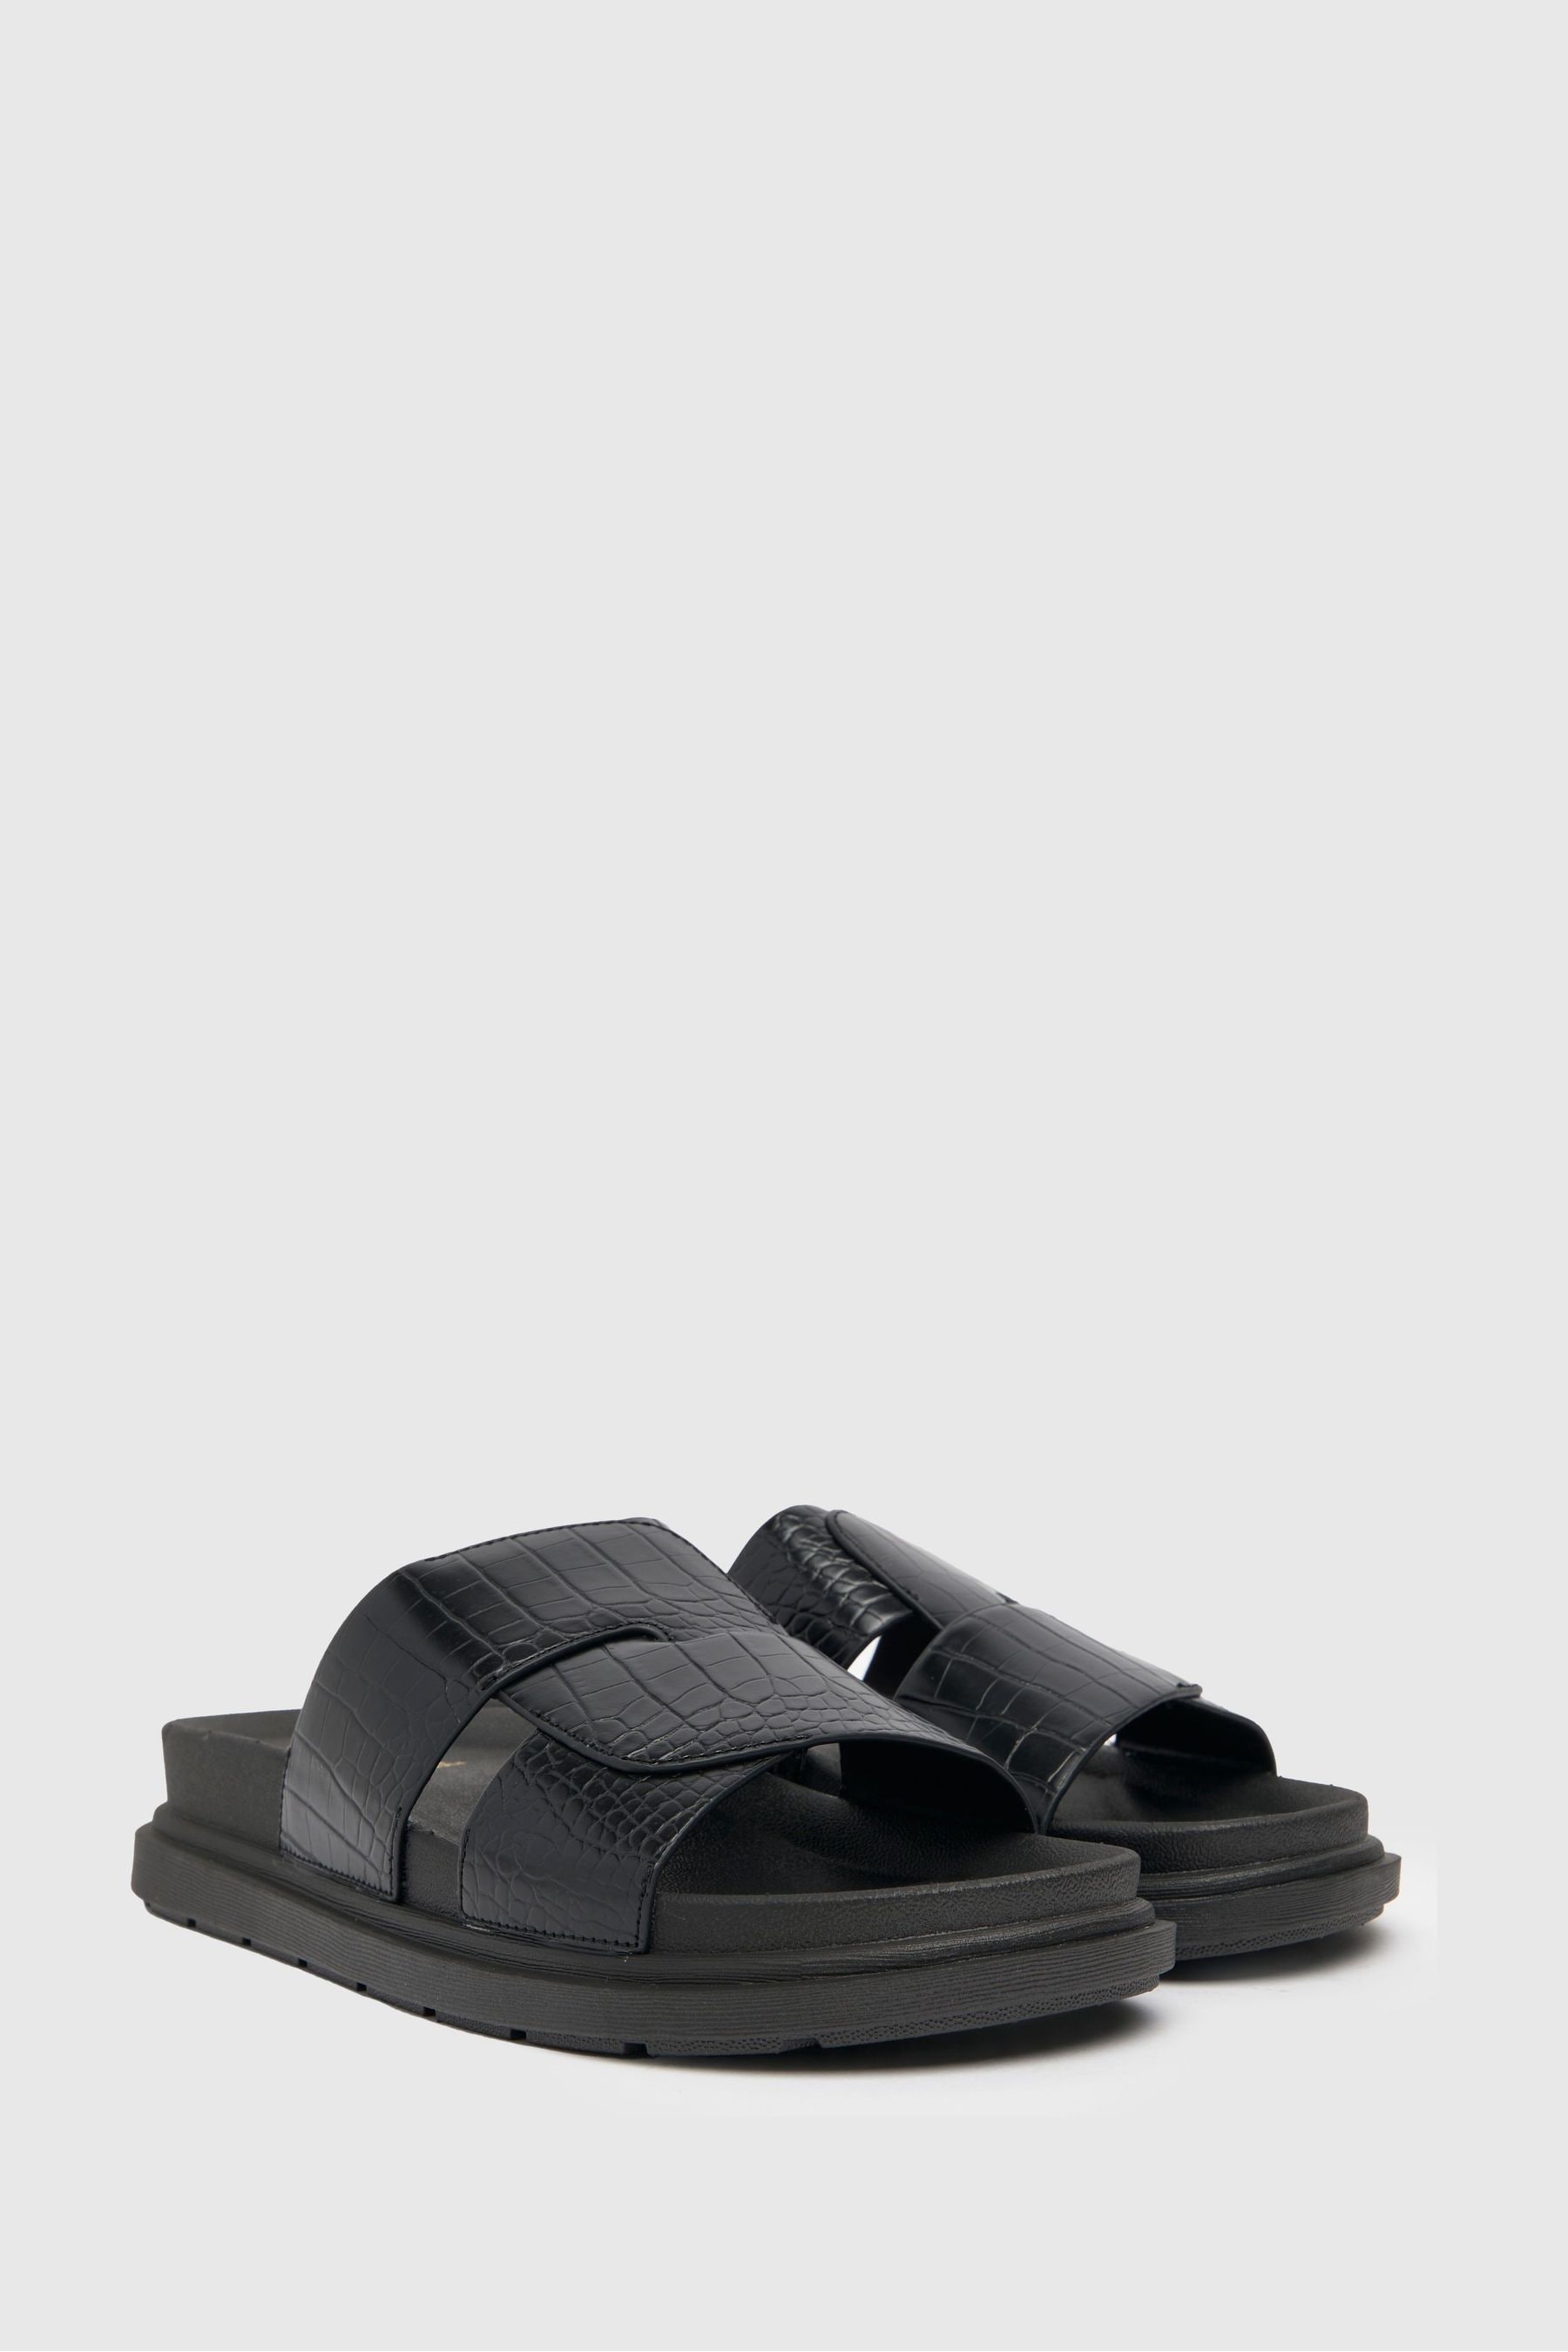 Buy Schuh Tally Croc Cross Strap Footbed Sandals from the Next UK ...